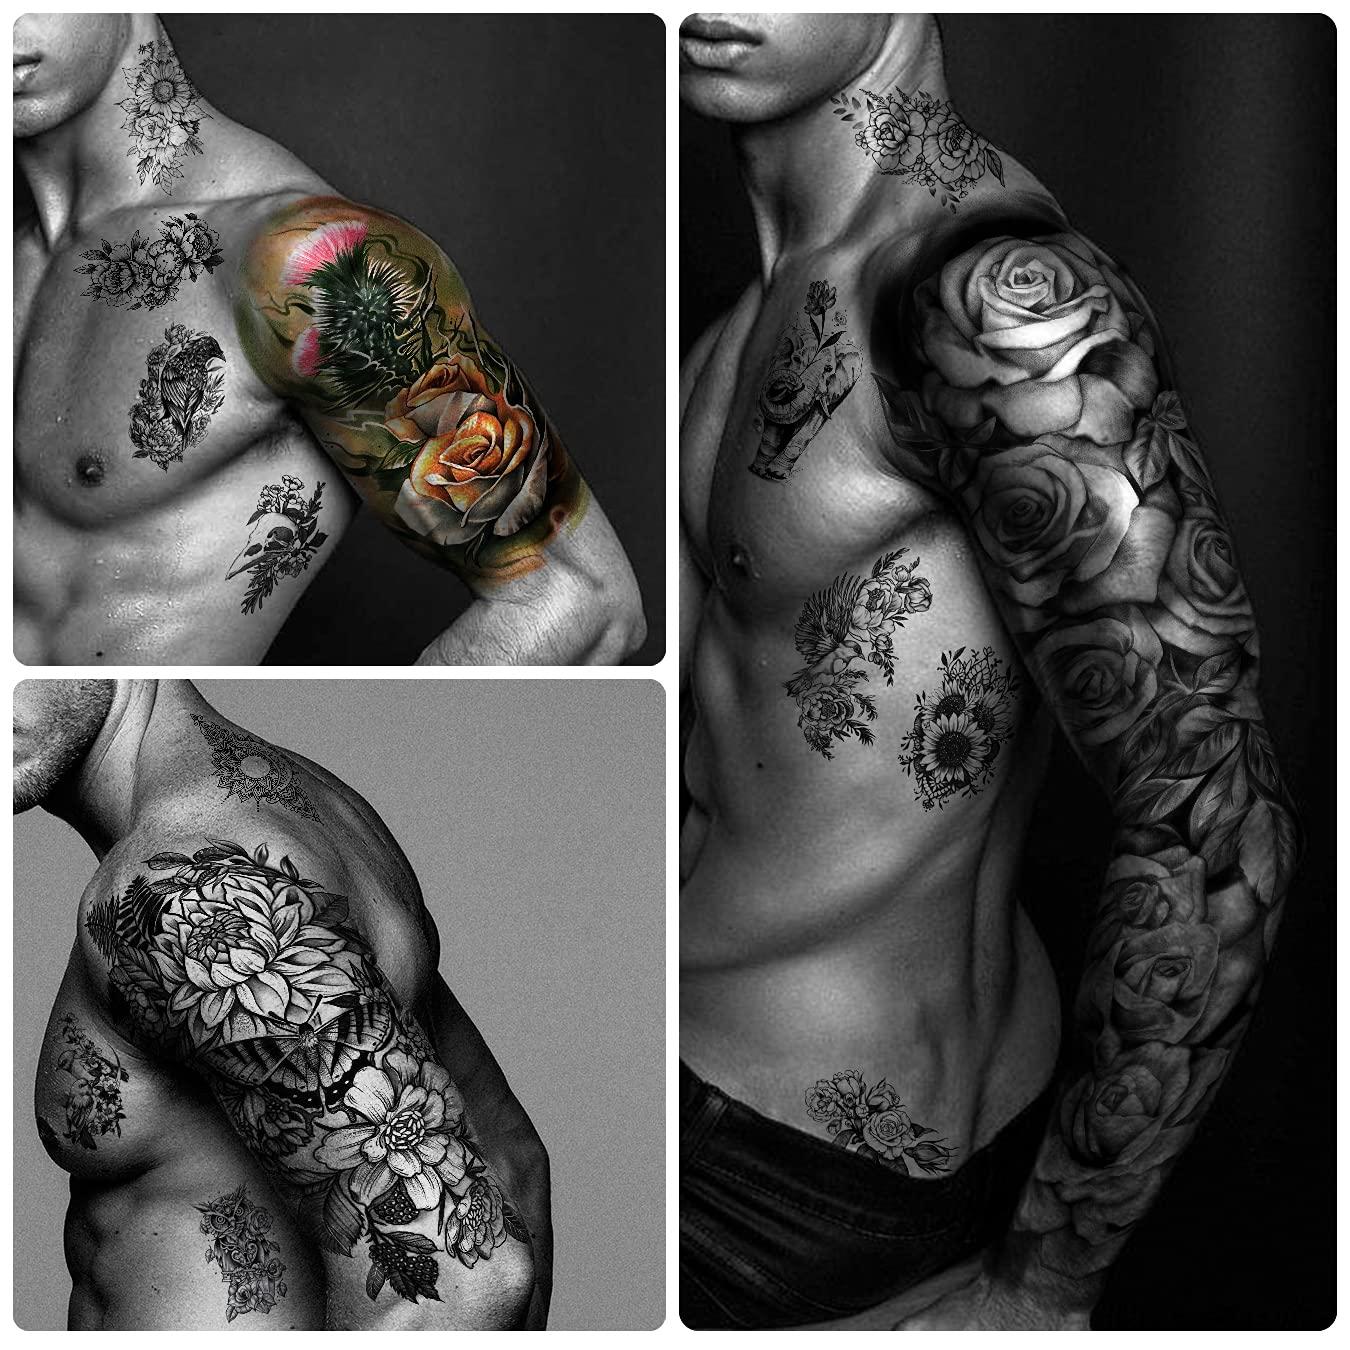 SOOVSY 46 Sheets Extra Size Full Arm Temporary Tattoo Men Skull Wolf Angel Floral Butterfly Half Arm Shoulder Semi Permanent Tattoo for Women Fake Tattoos That Look Real Temp Tattoos color-02